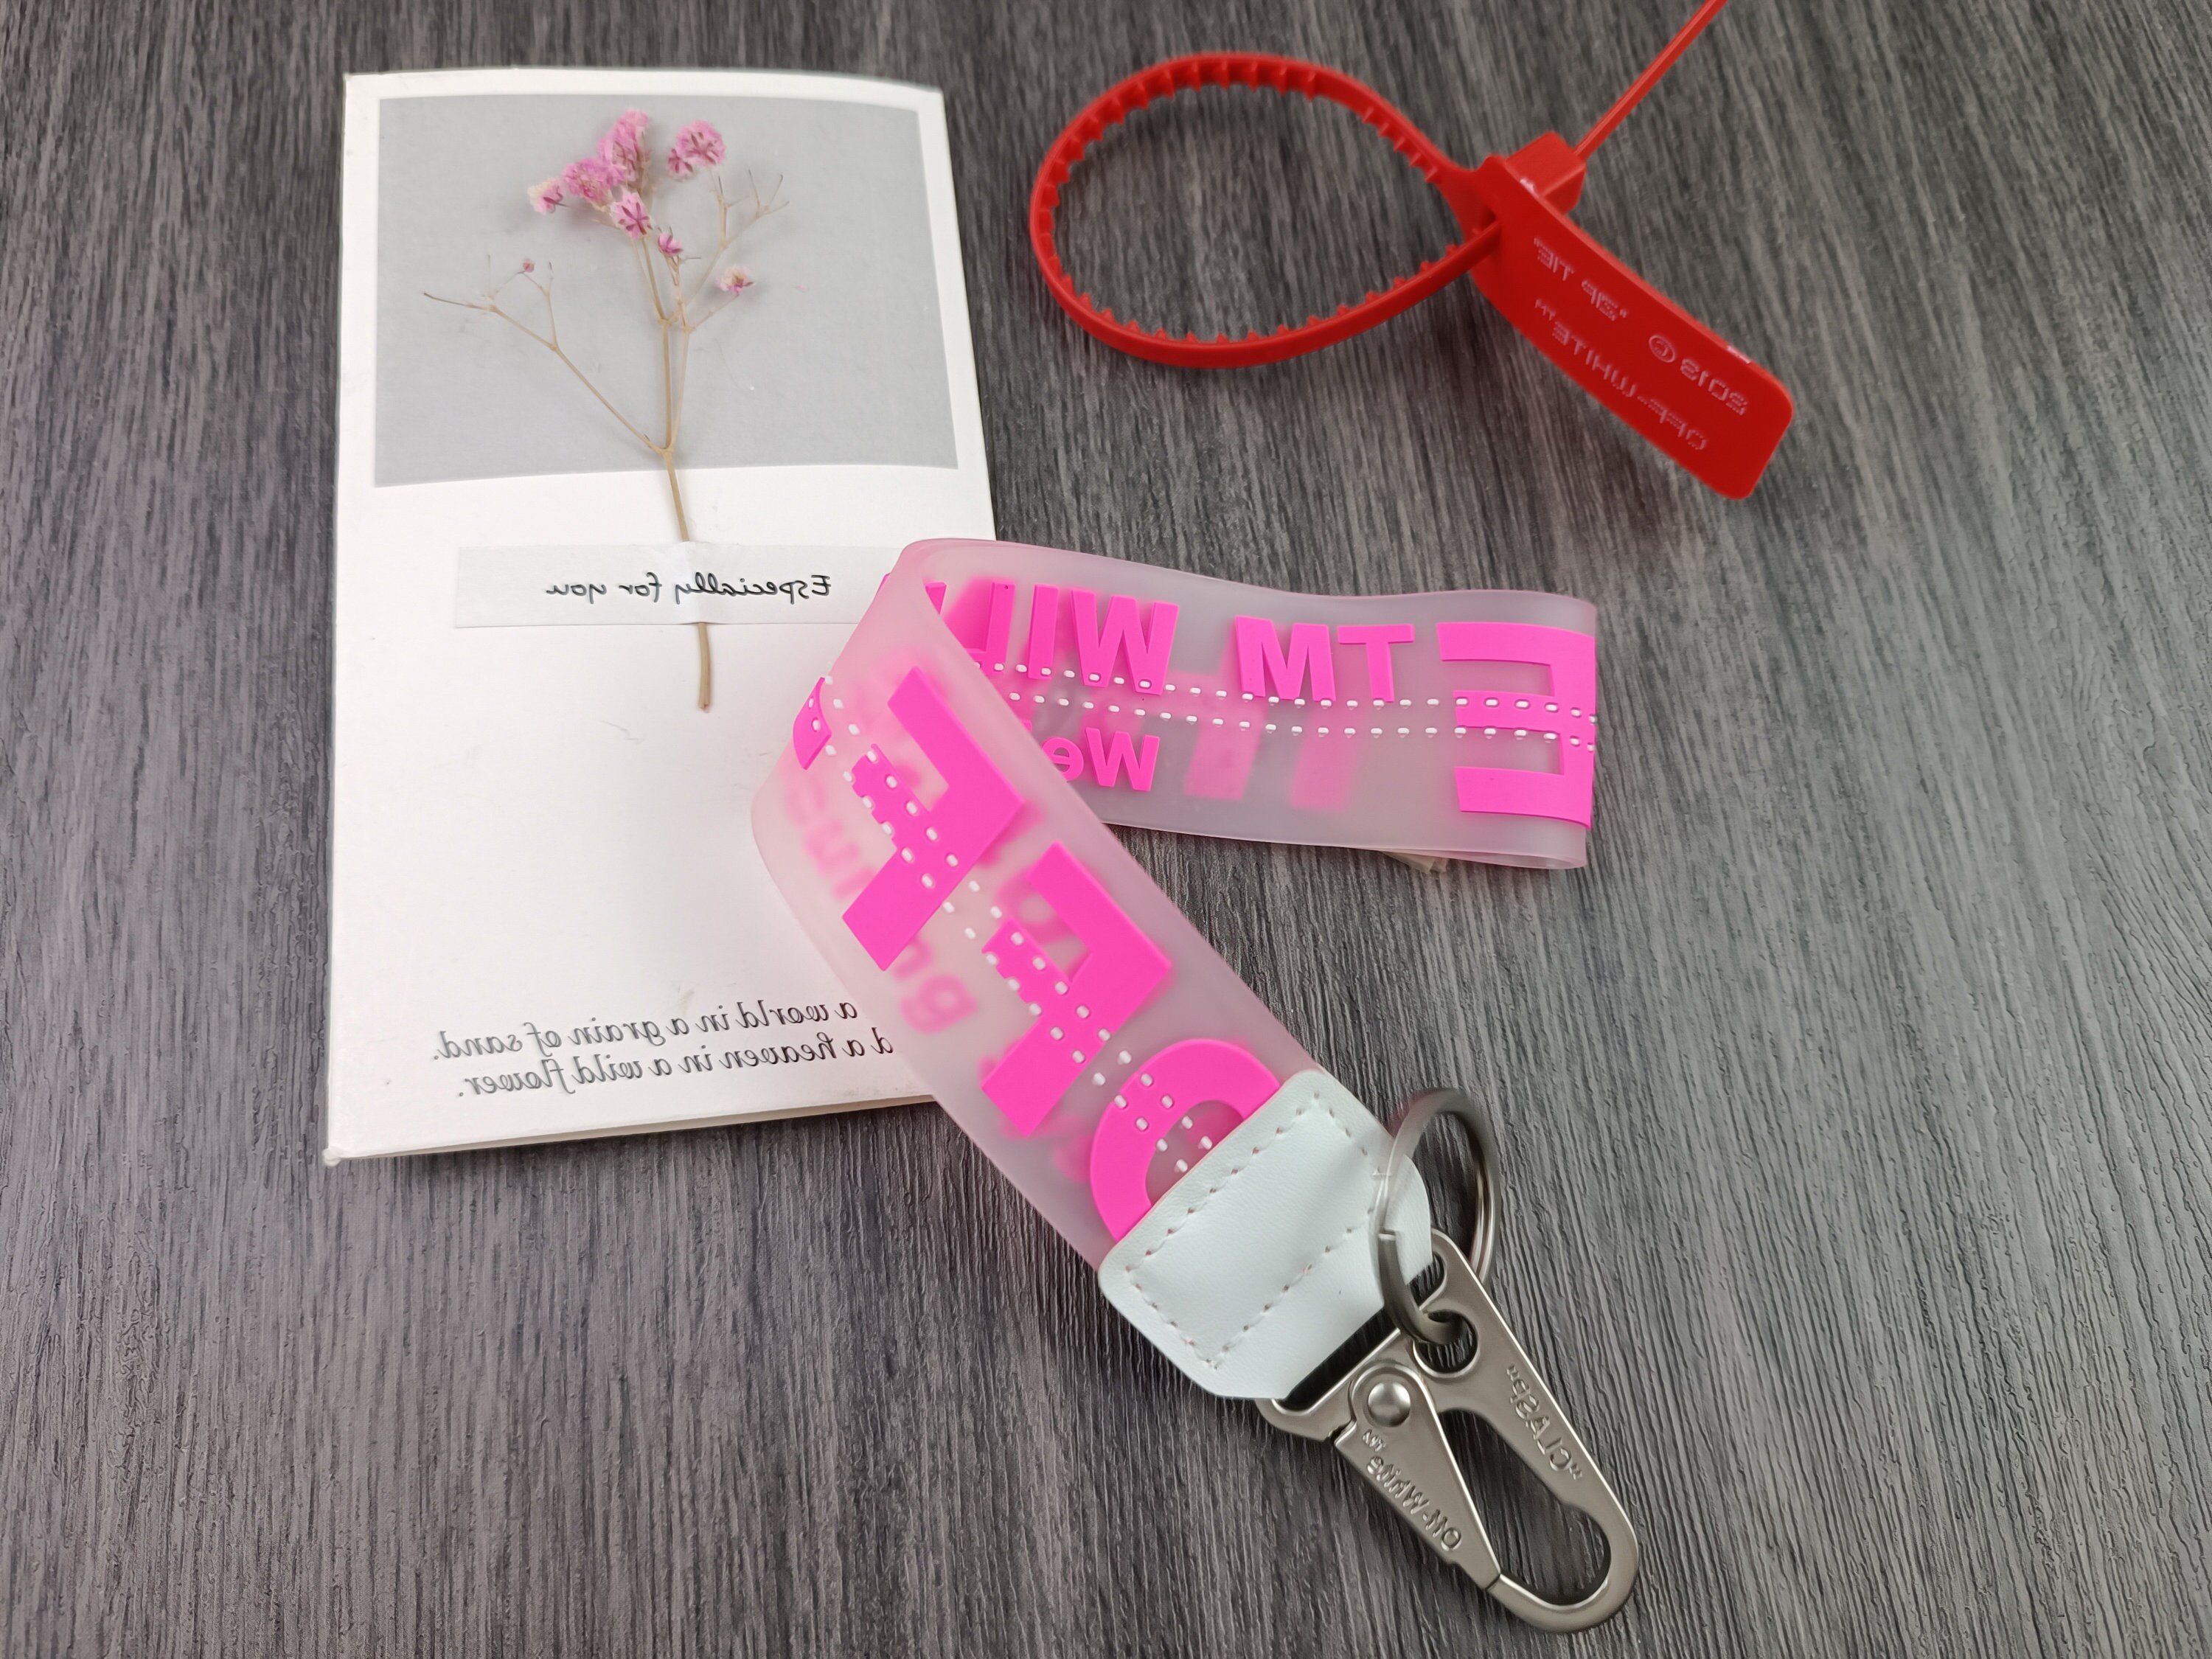 OFF WHITE Designer Lanyard Keychain Industrial Clear/Pink with Red ZipTie  NEW